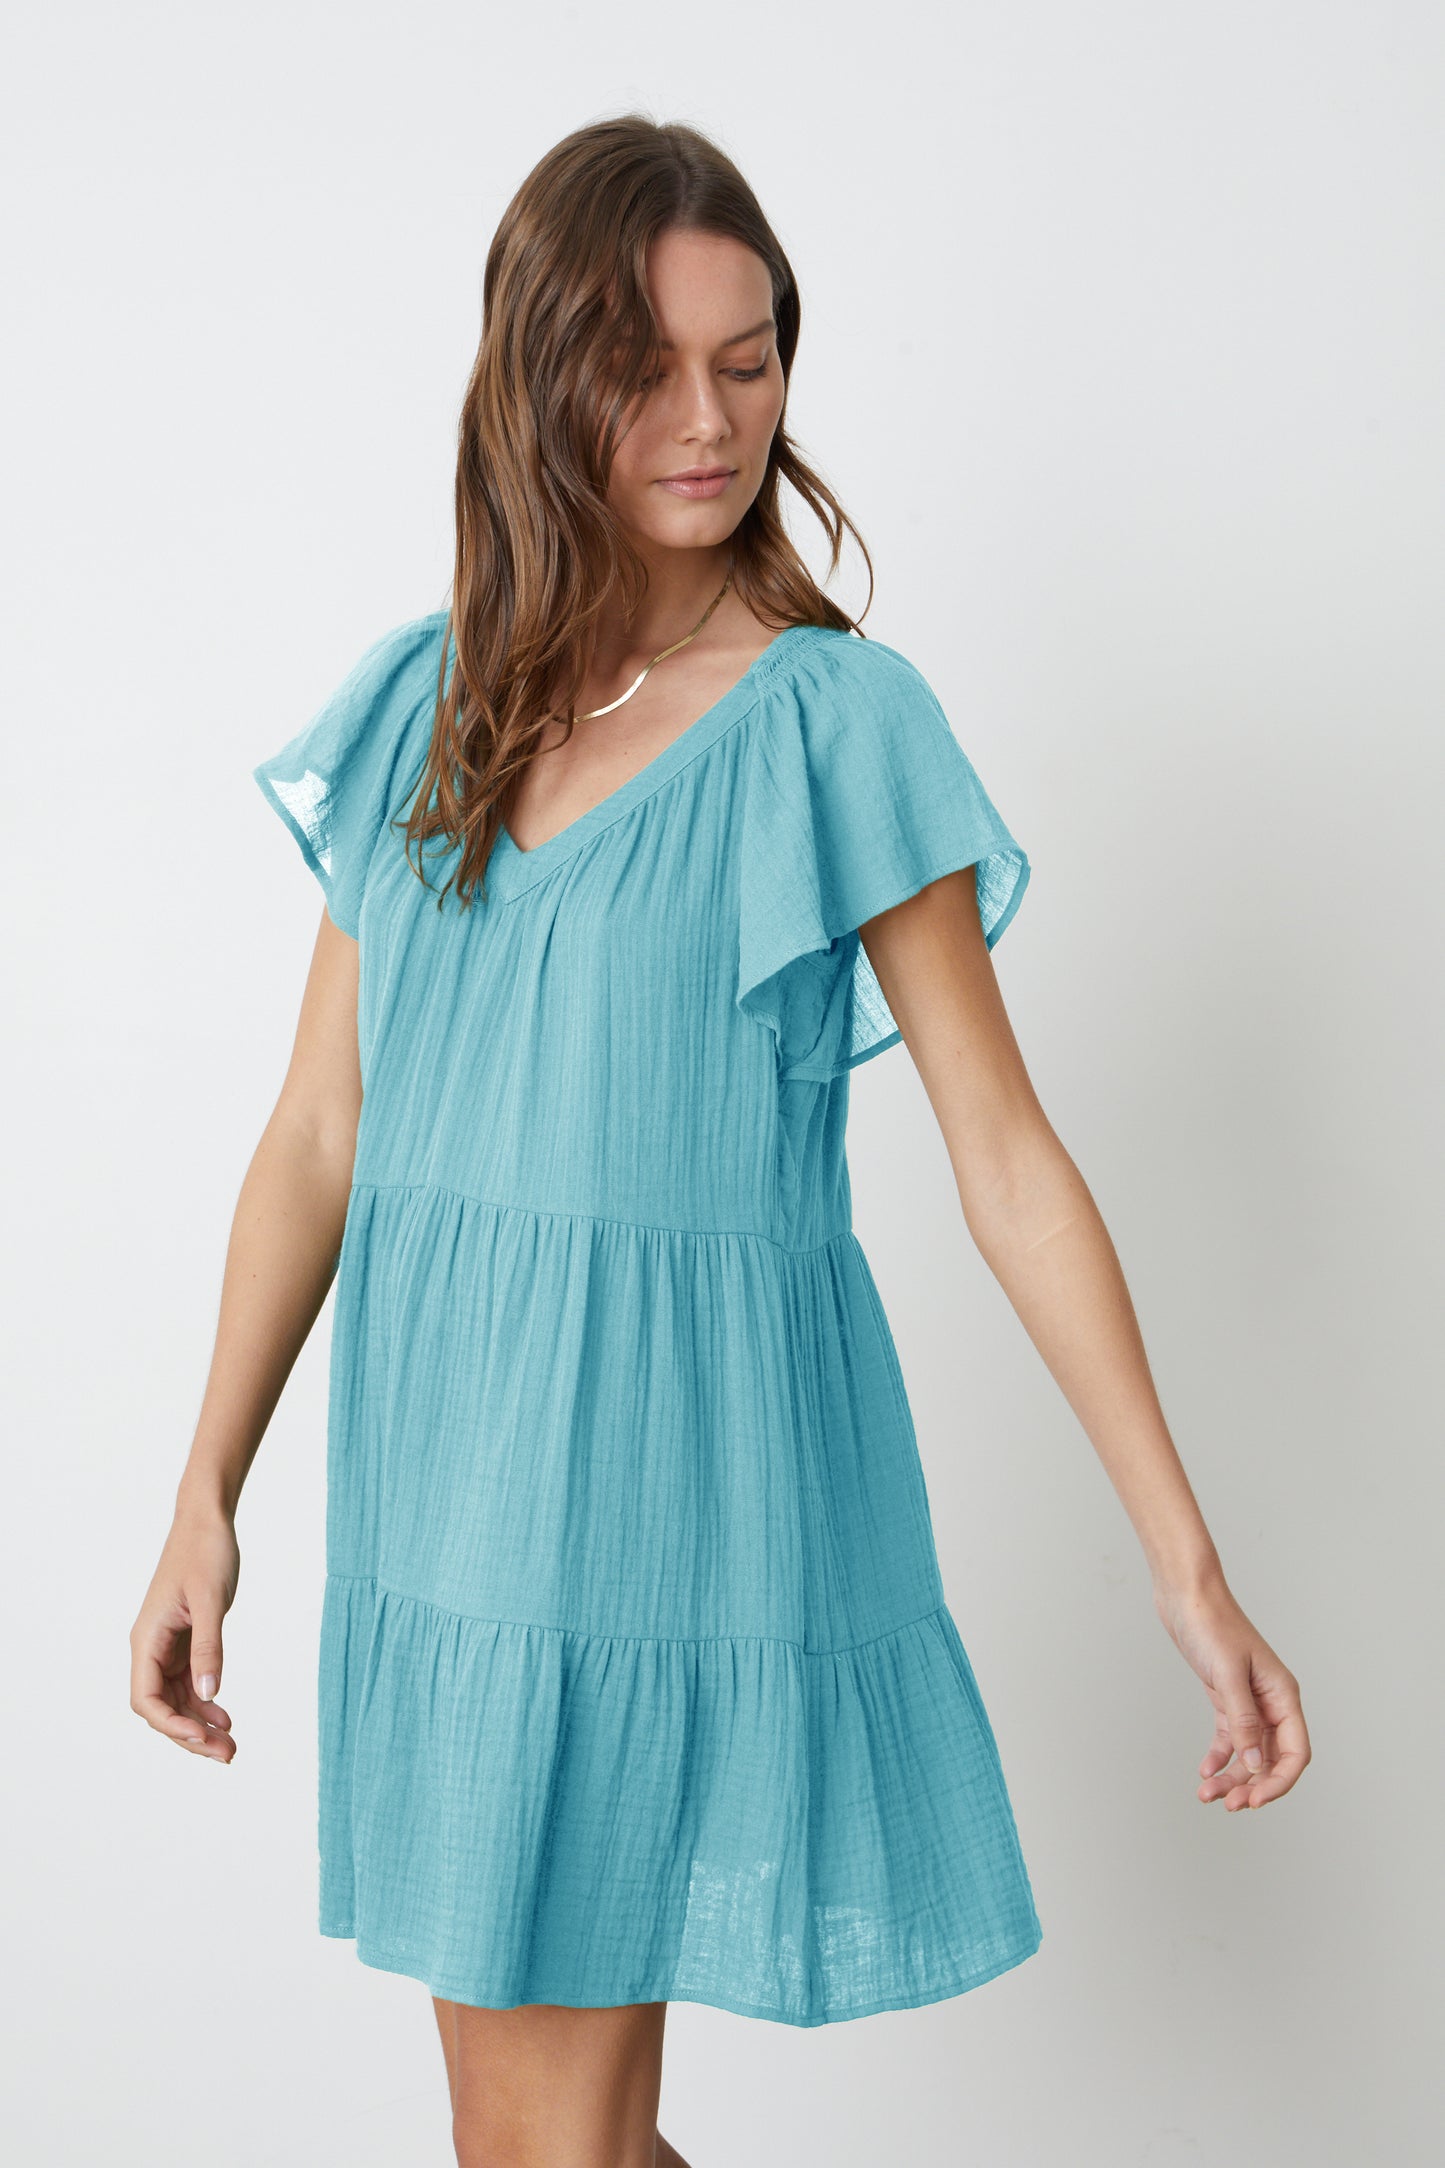 The model is wearing a Velvet by Graham & Spencer ELEANOR COTTON GAUZE TIERED DRESS in aqua blue with ruffles.-26577372315841